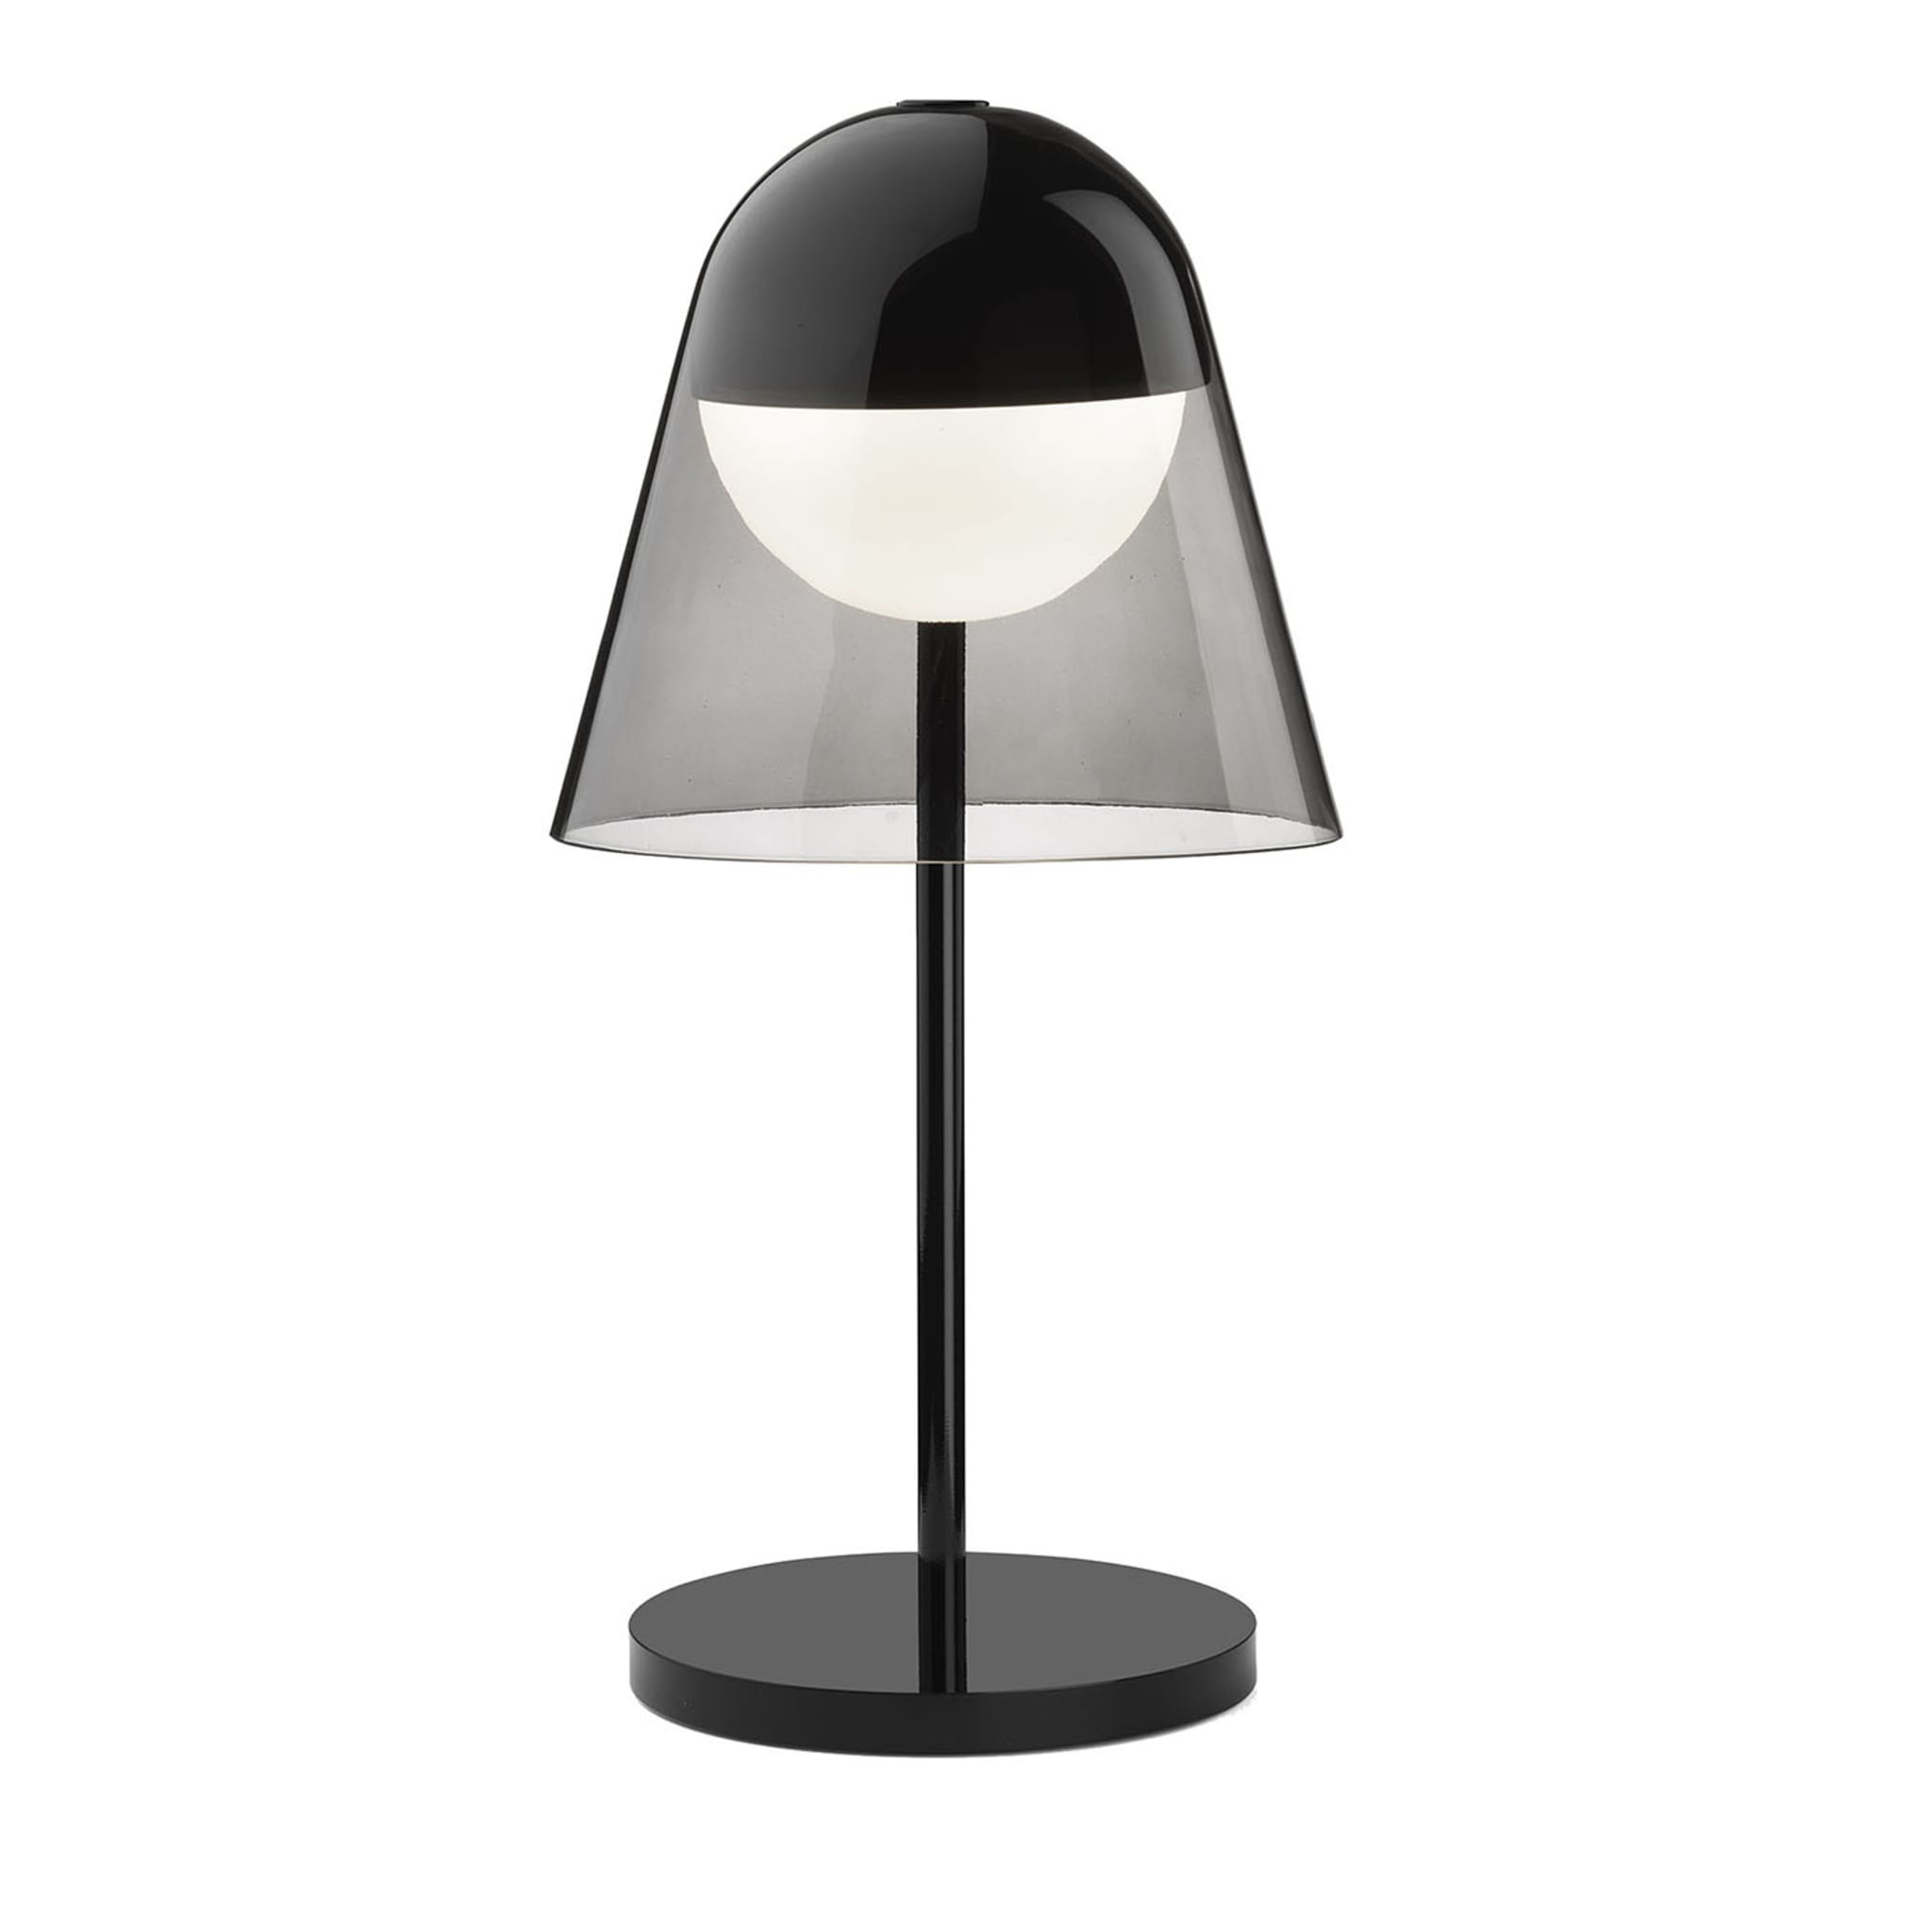 Helios Table Lamp by Branch Creative - Alternative view 1